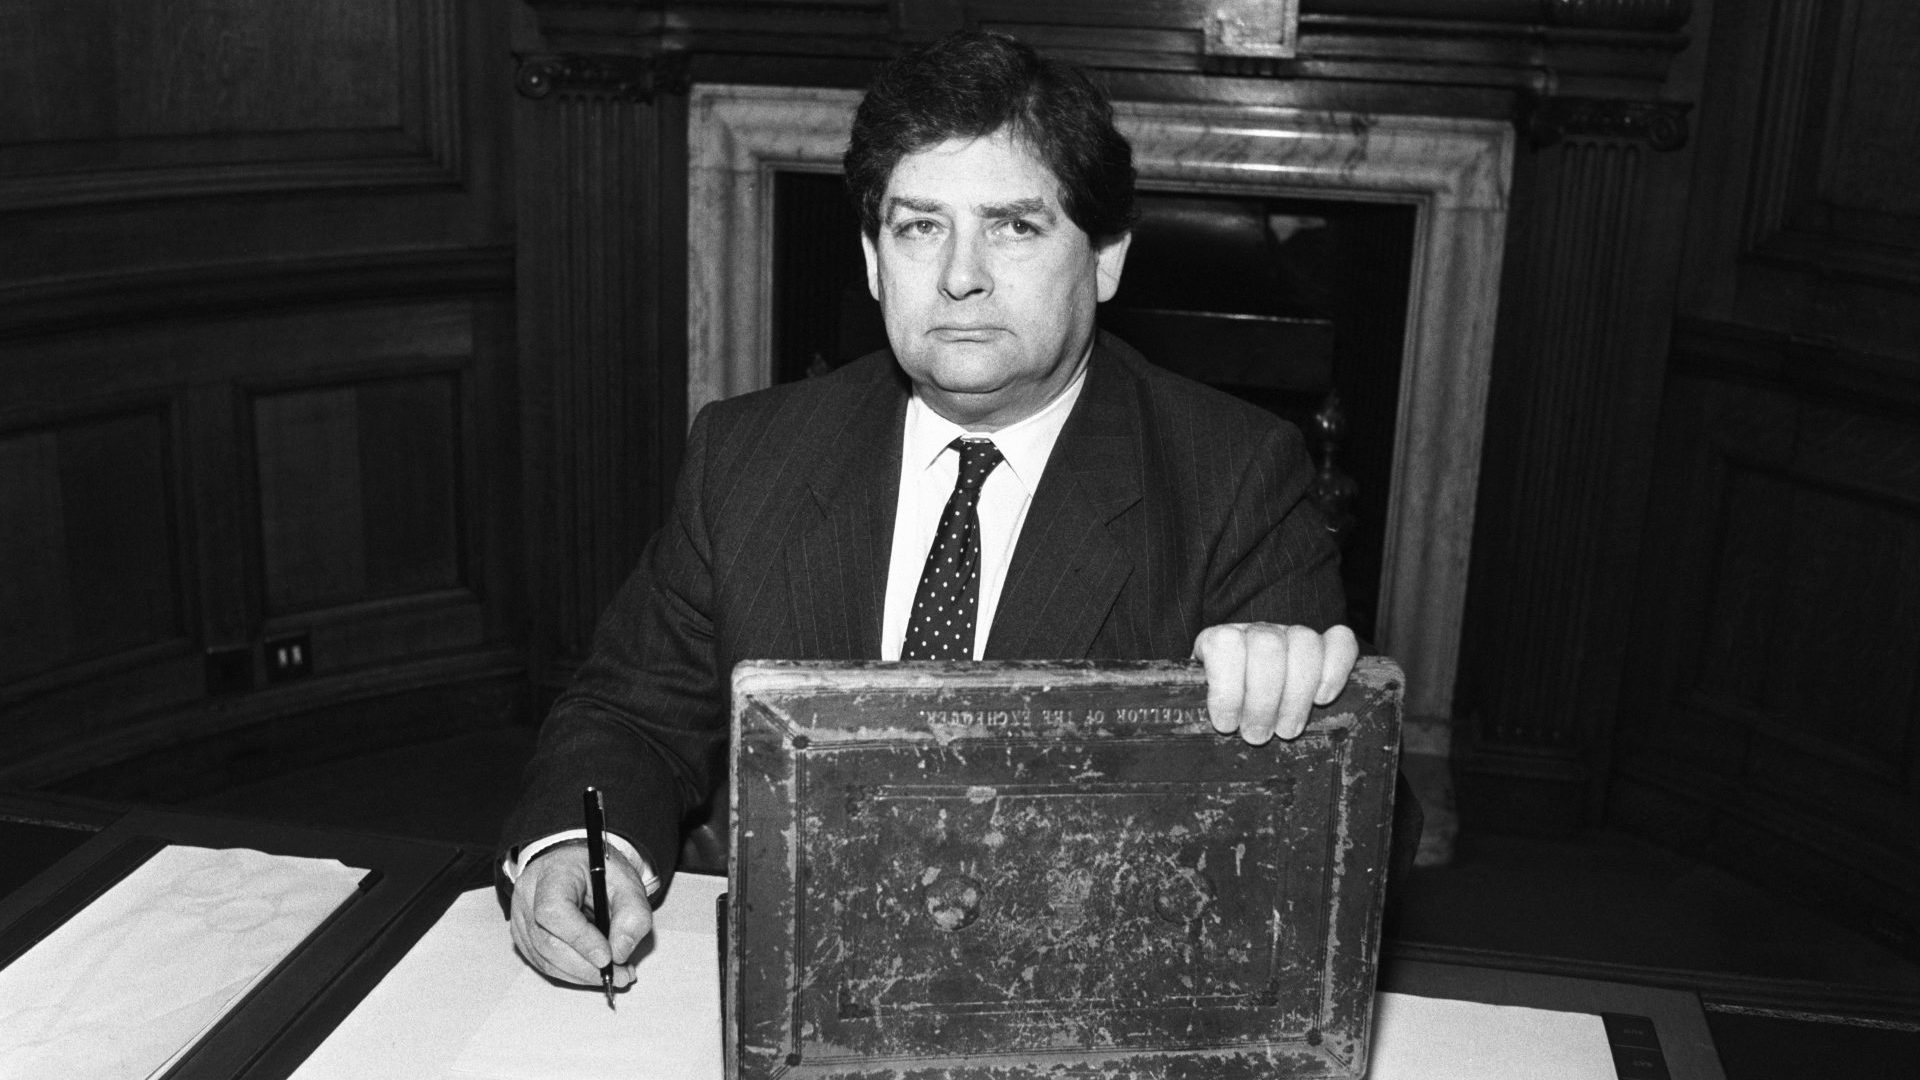 British Chancellor of the Exchequer Nigel Lawson at work with his budget box on March 08, 1989. Photo: B. Barrett/Express/Getty Images